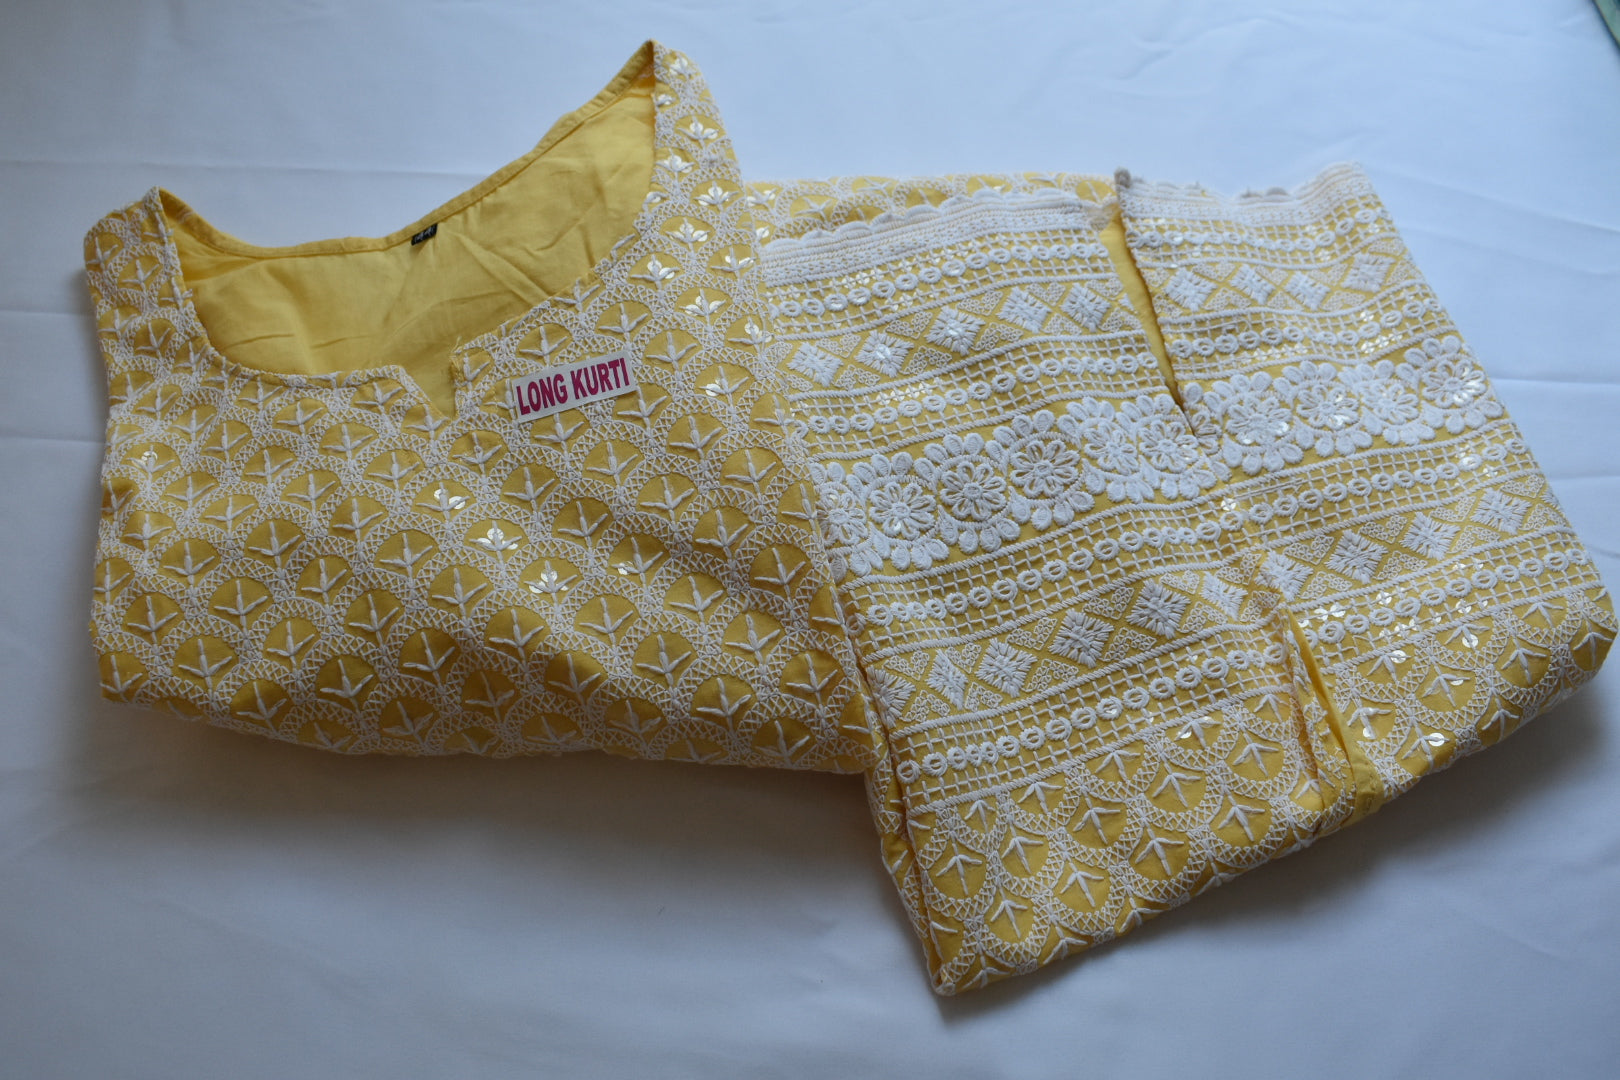 Light Yellow Color - Poly Cotton Chicken work and Sequin work Kurti - Size Small/Medium - 30/32 Junior size. Big Girls size - 18 plus